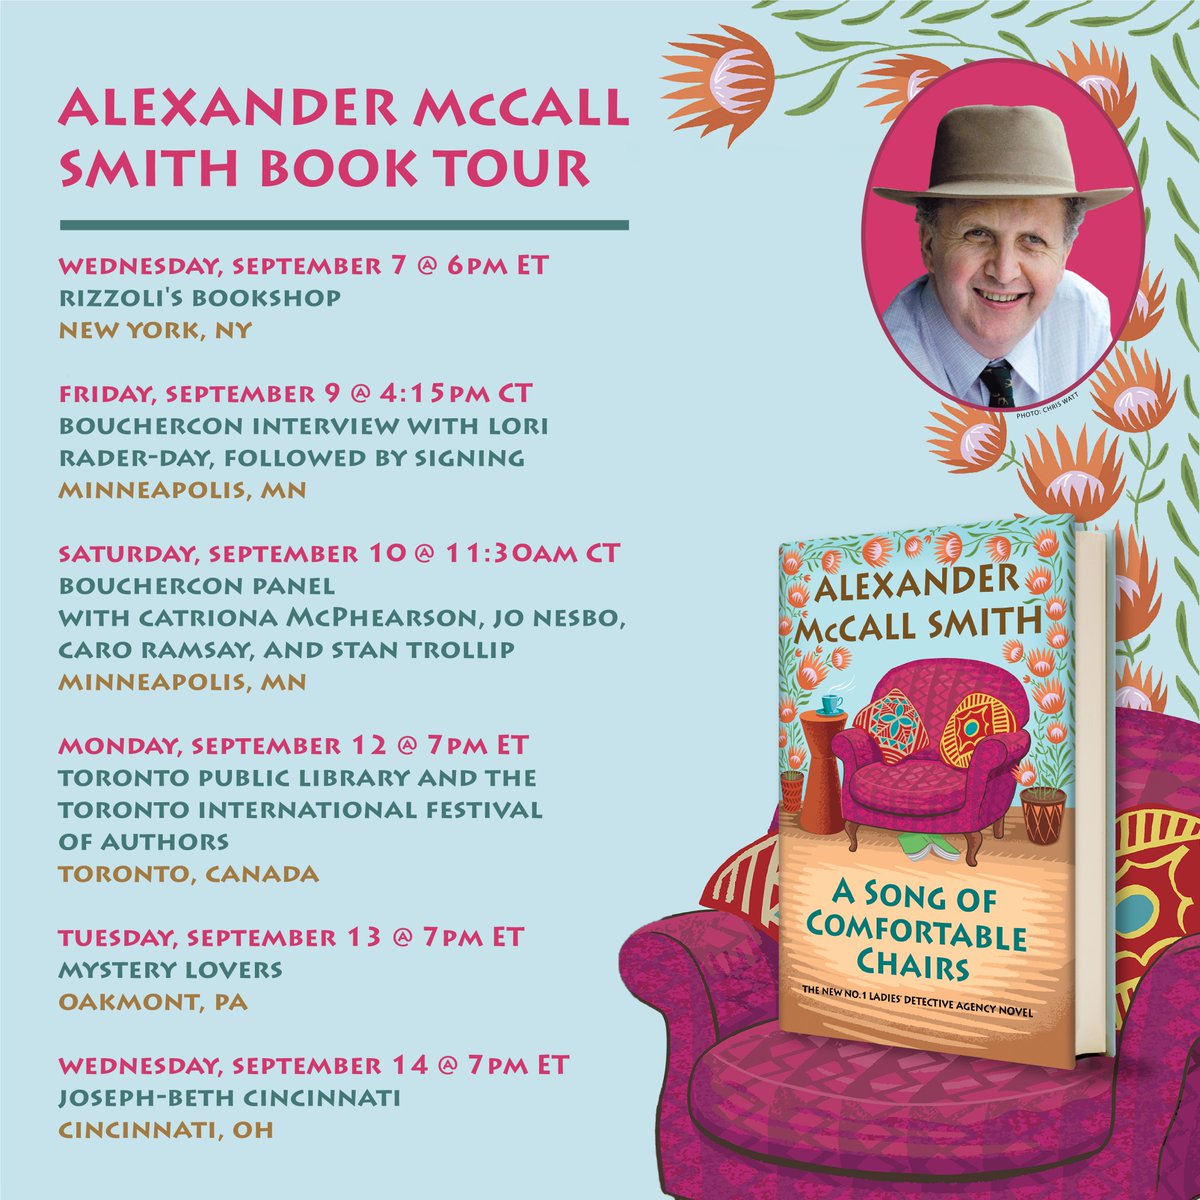 🥳Calling all @McCallSmith fans!🥳 Alexander is travelling to events across the pond for the first time in three years. Book now for your chance to see him in person. alexandermccallsmith.com/category/events